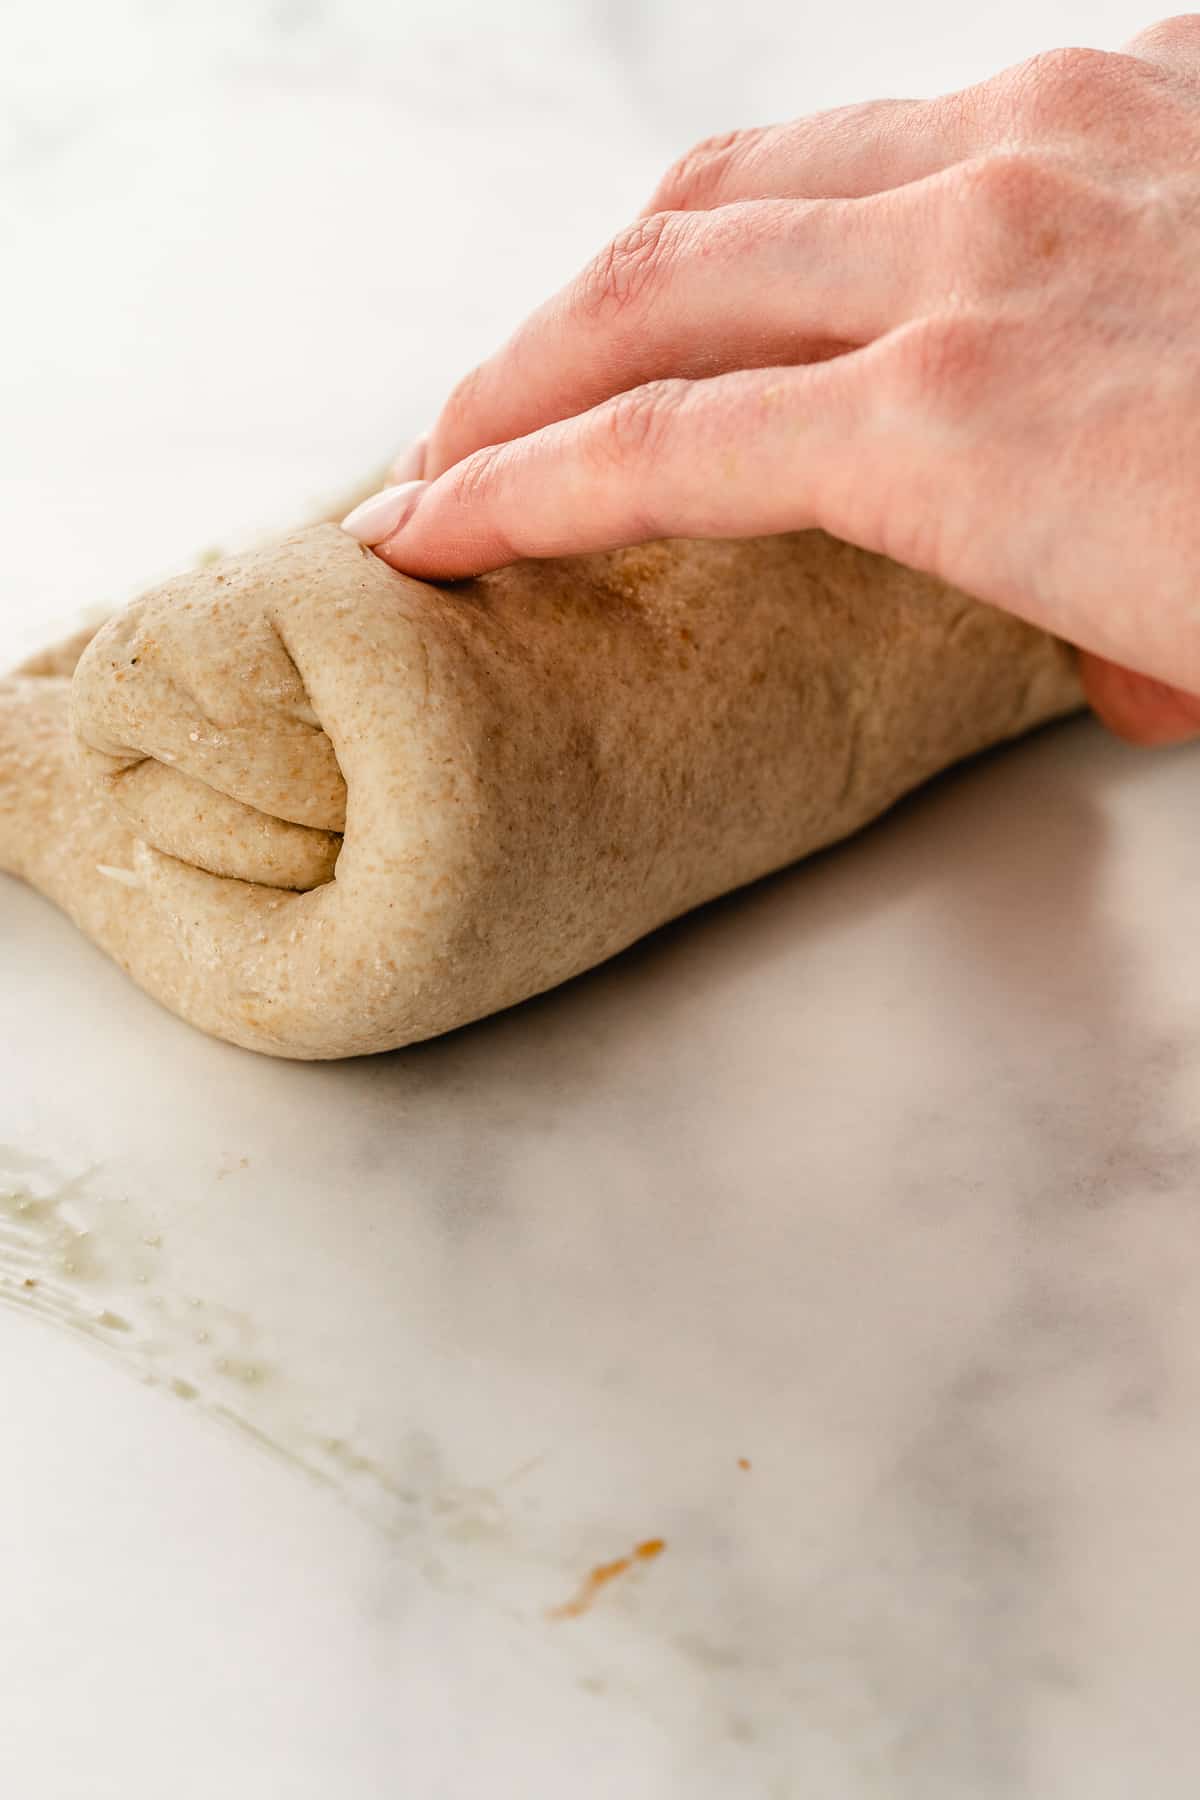 Rolling Stromboli Pizza before cooking